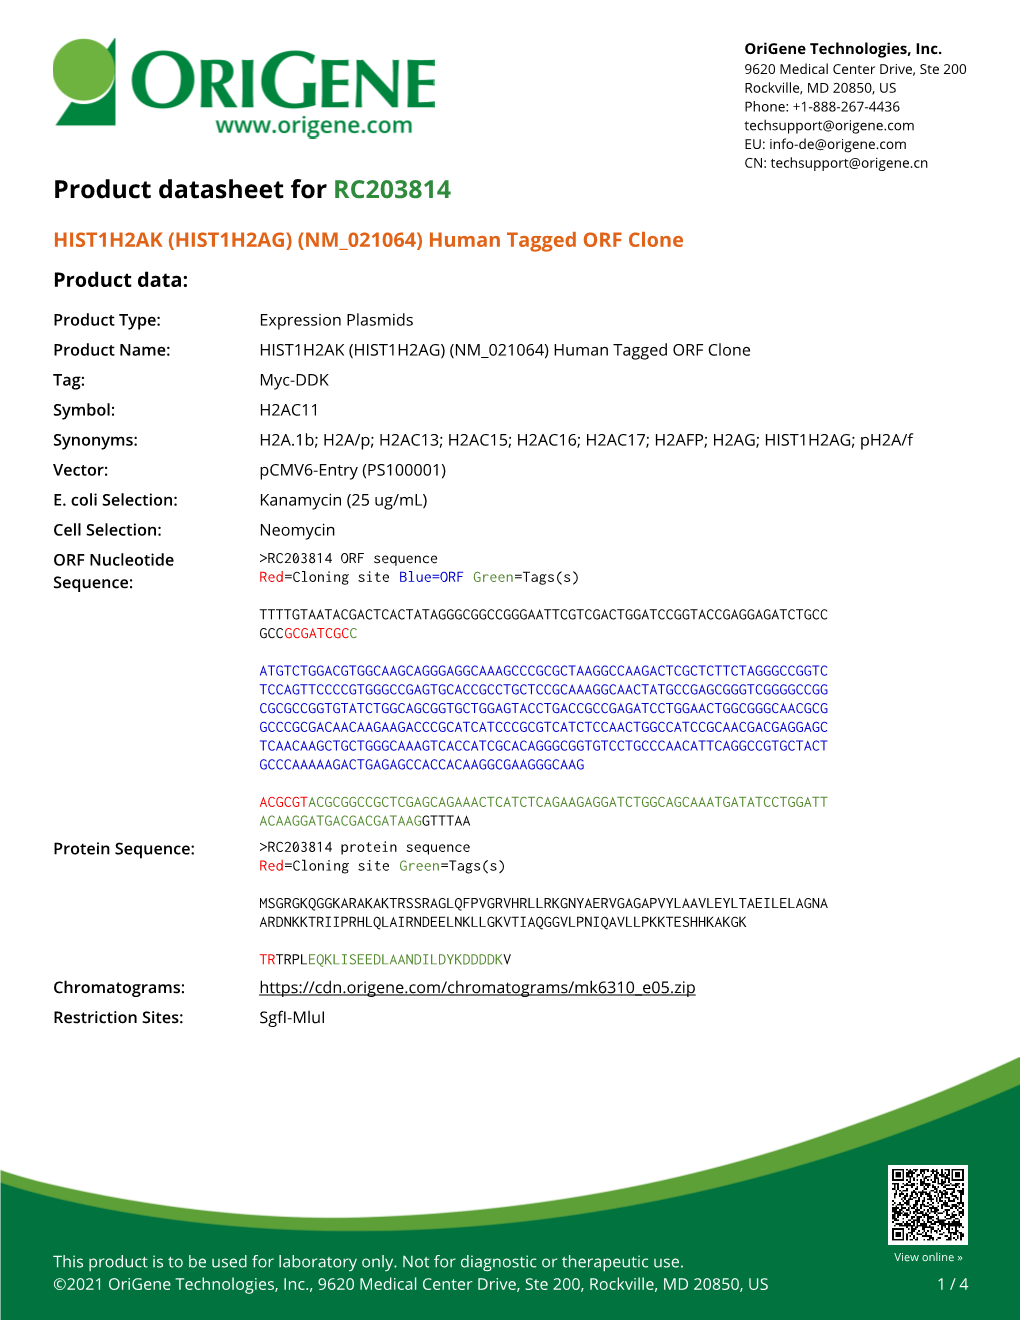 HIST1H2AK (HIST1H2AG) (NM 021064) Human Tagged ORF Clone Product Data